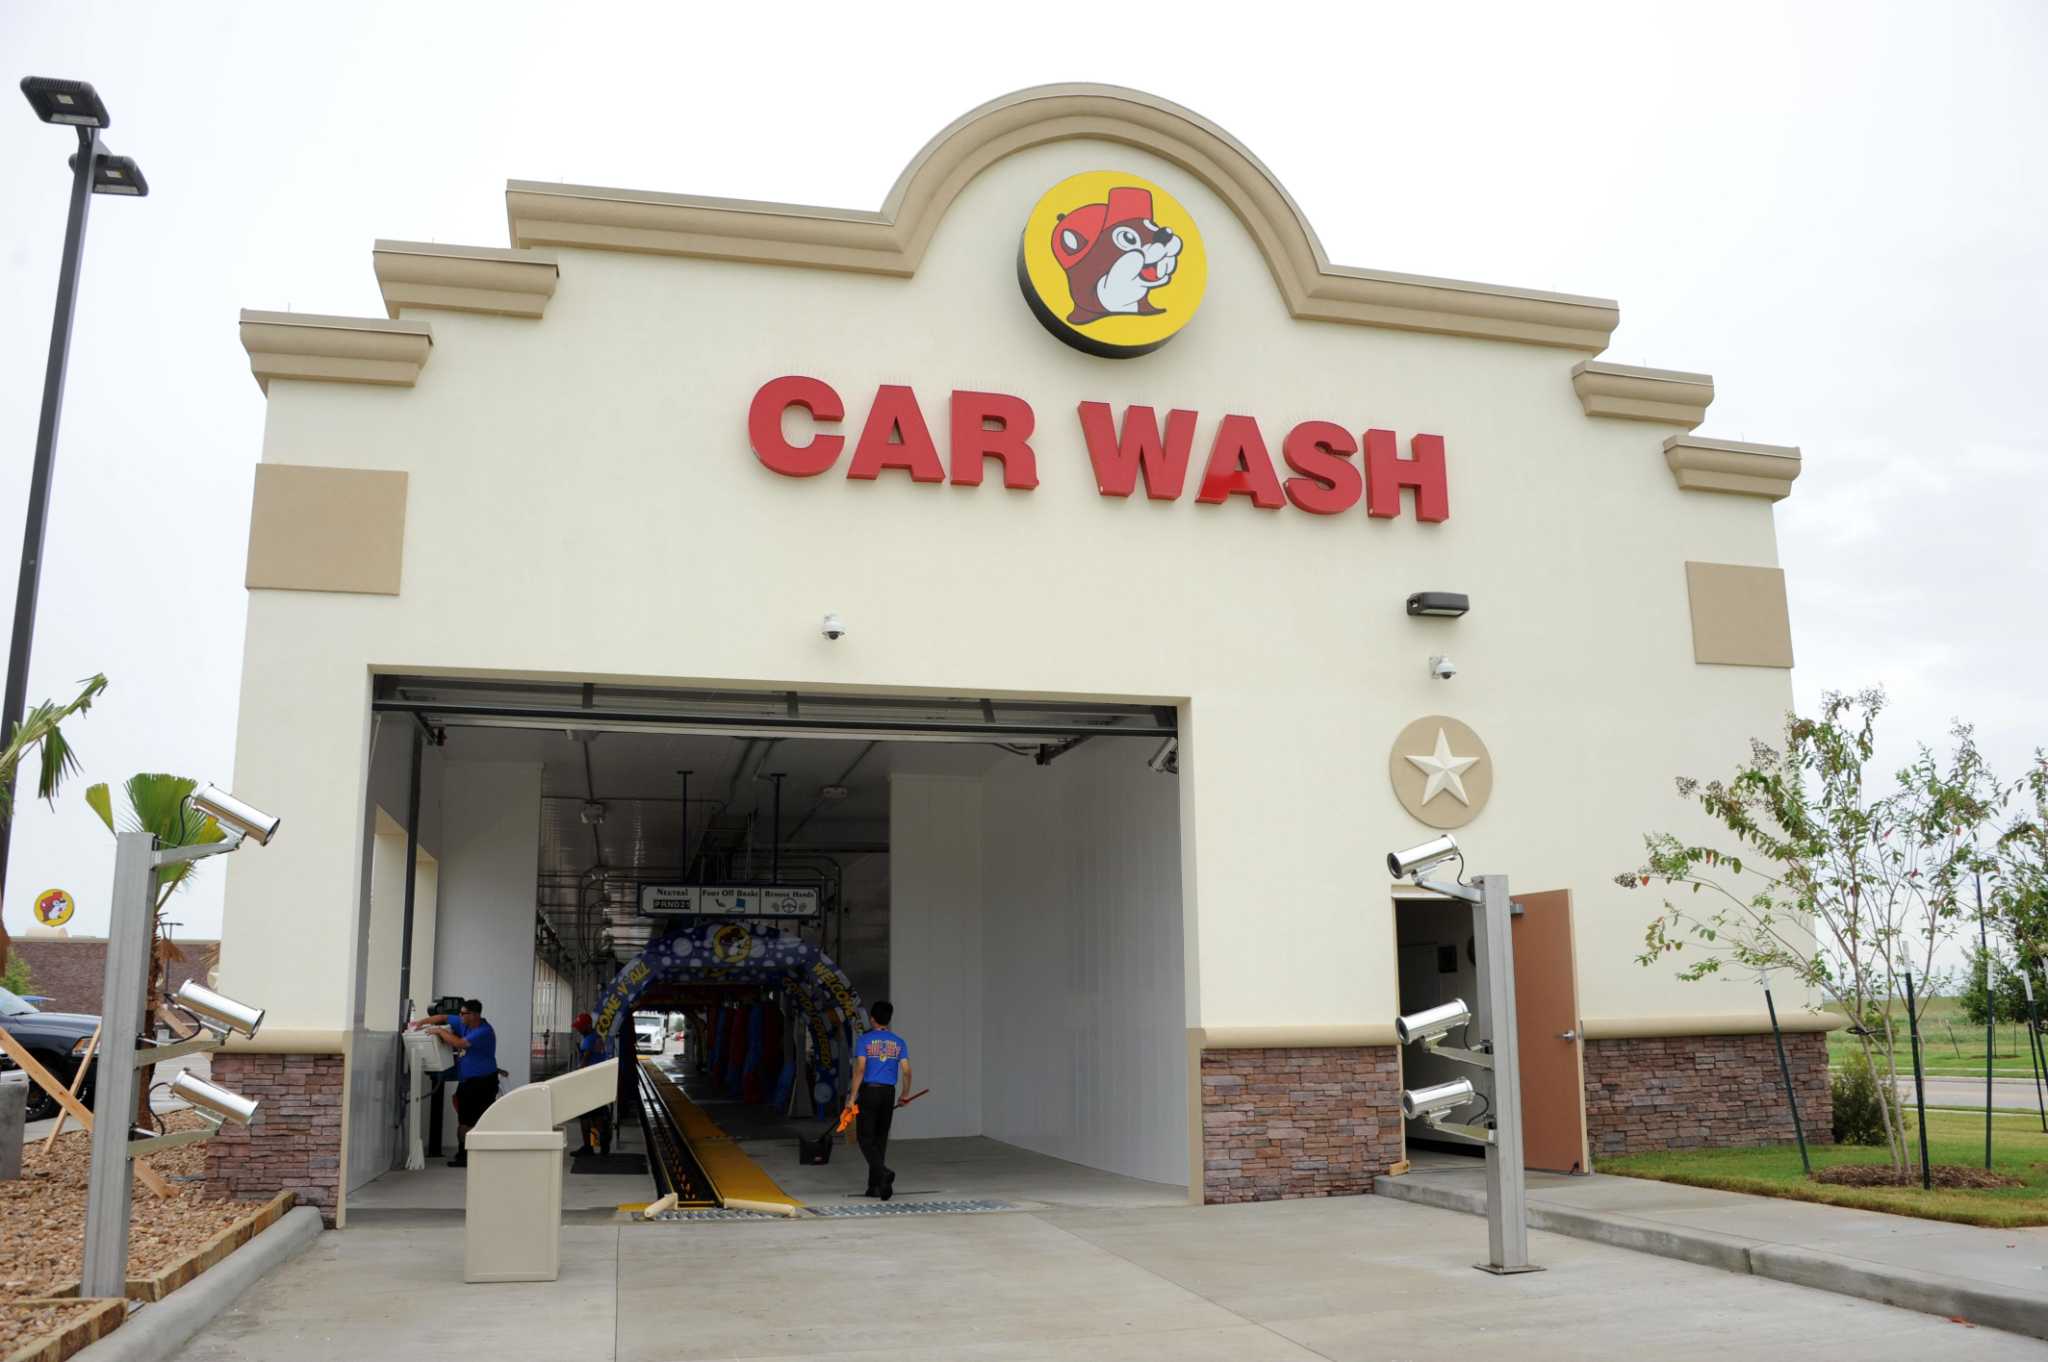 Guinness says Buc-ee's car wash in Katy is world's longest